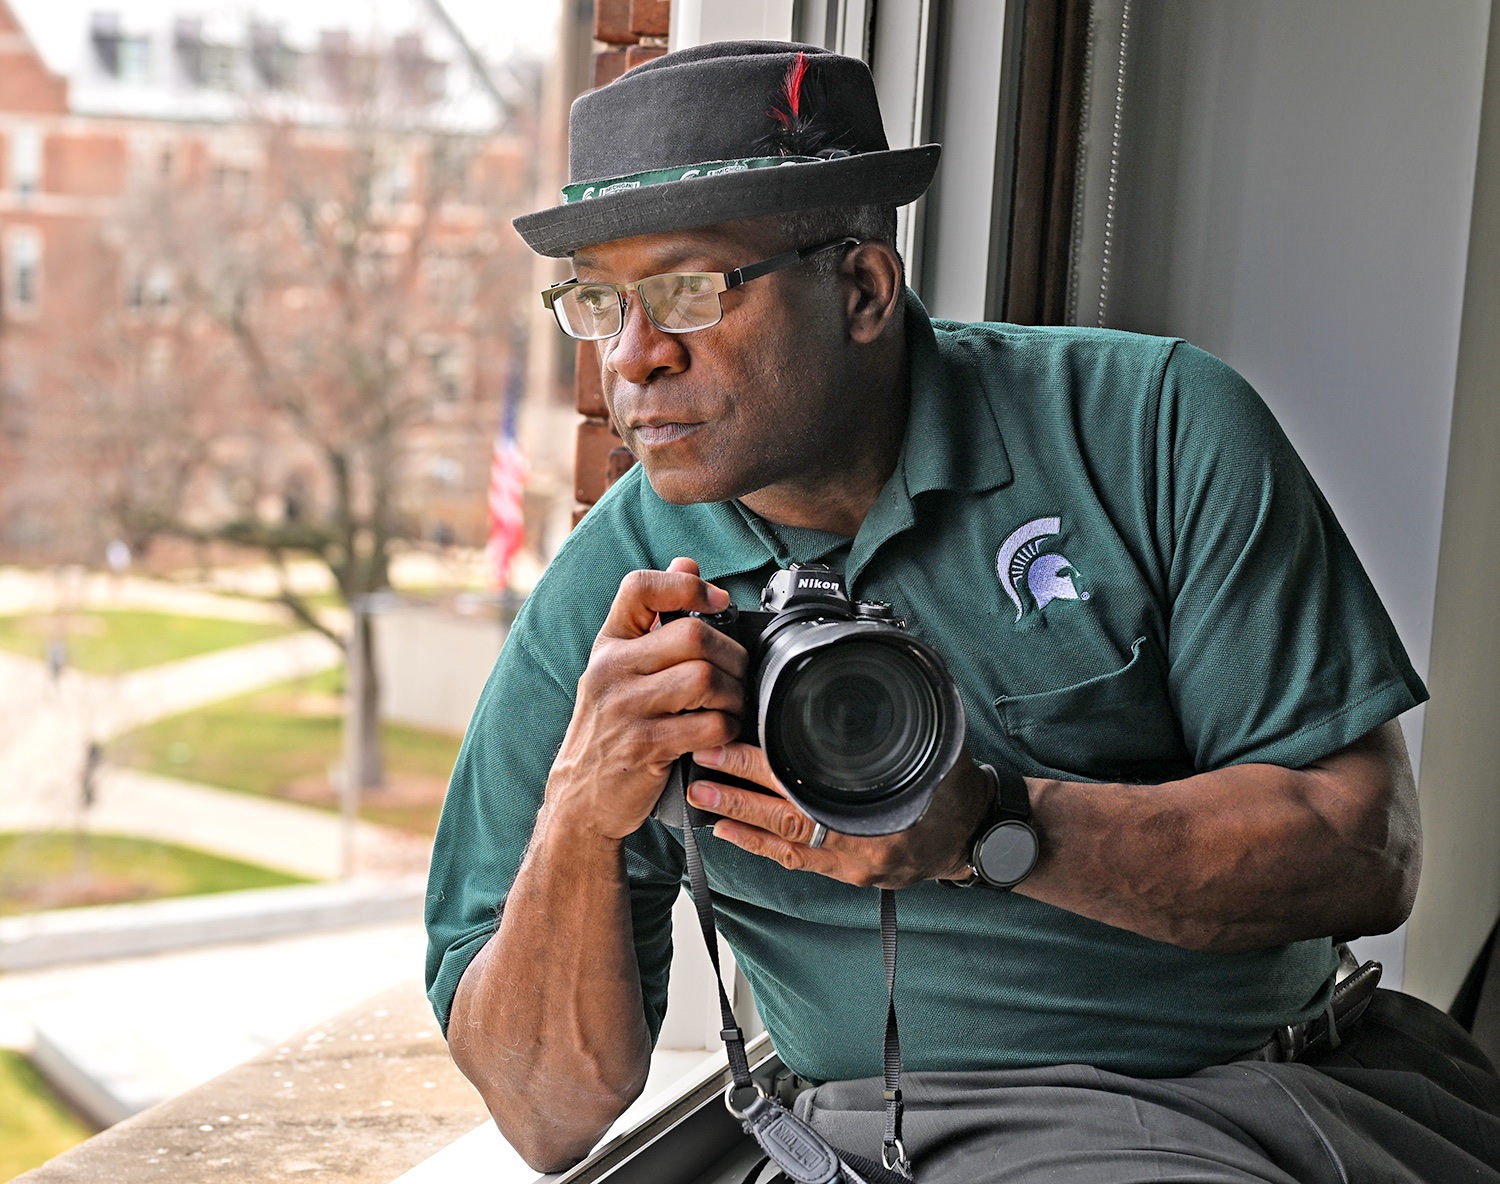 Derrick Turner with a camera in Olds Hall. Photo by G.L. Kohuth